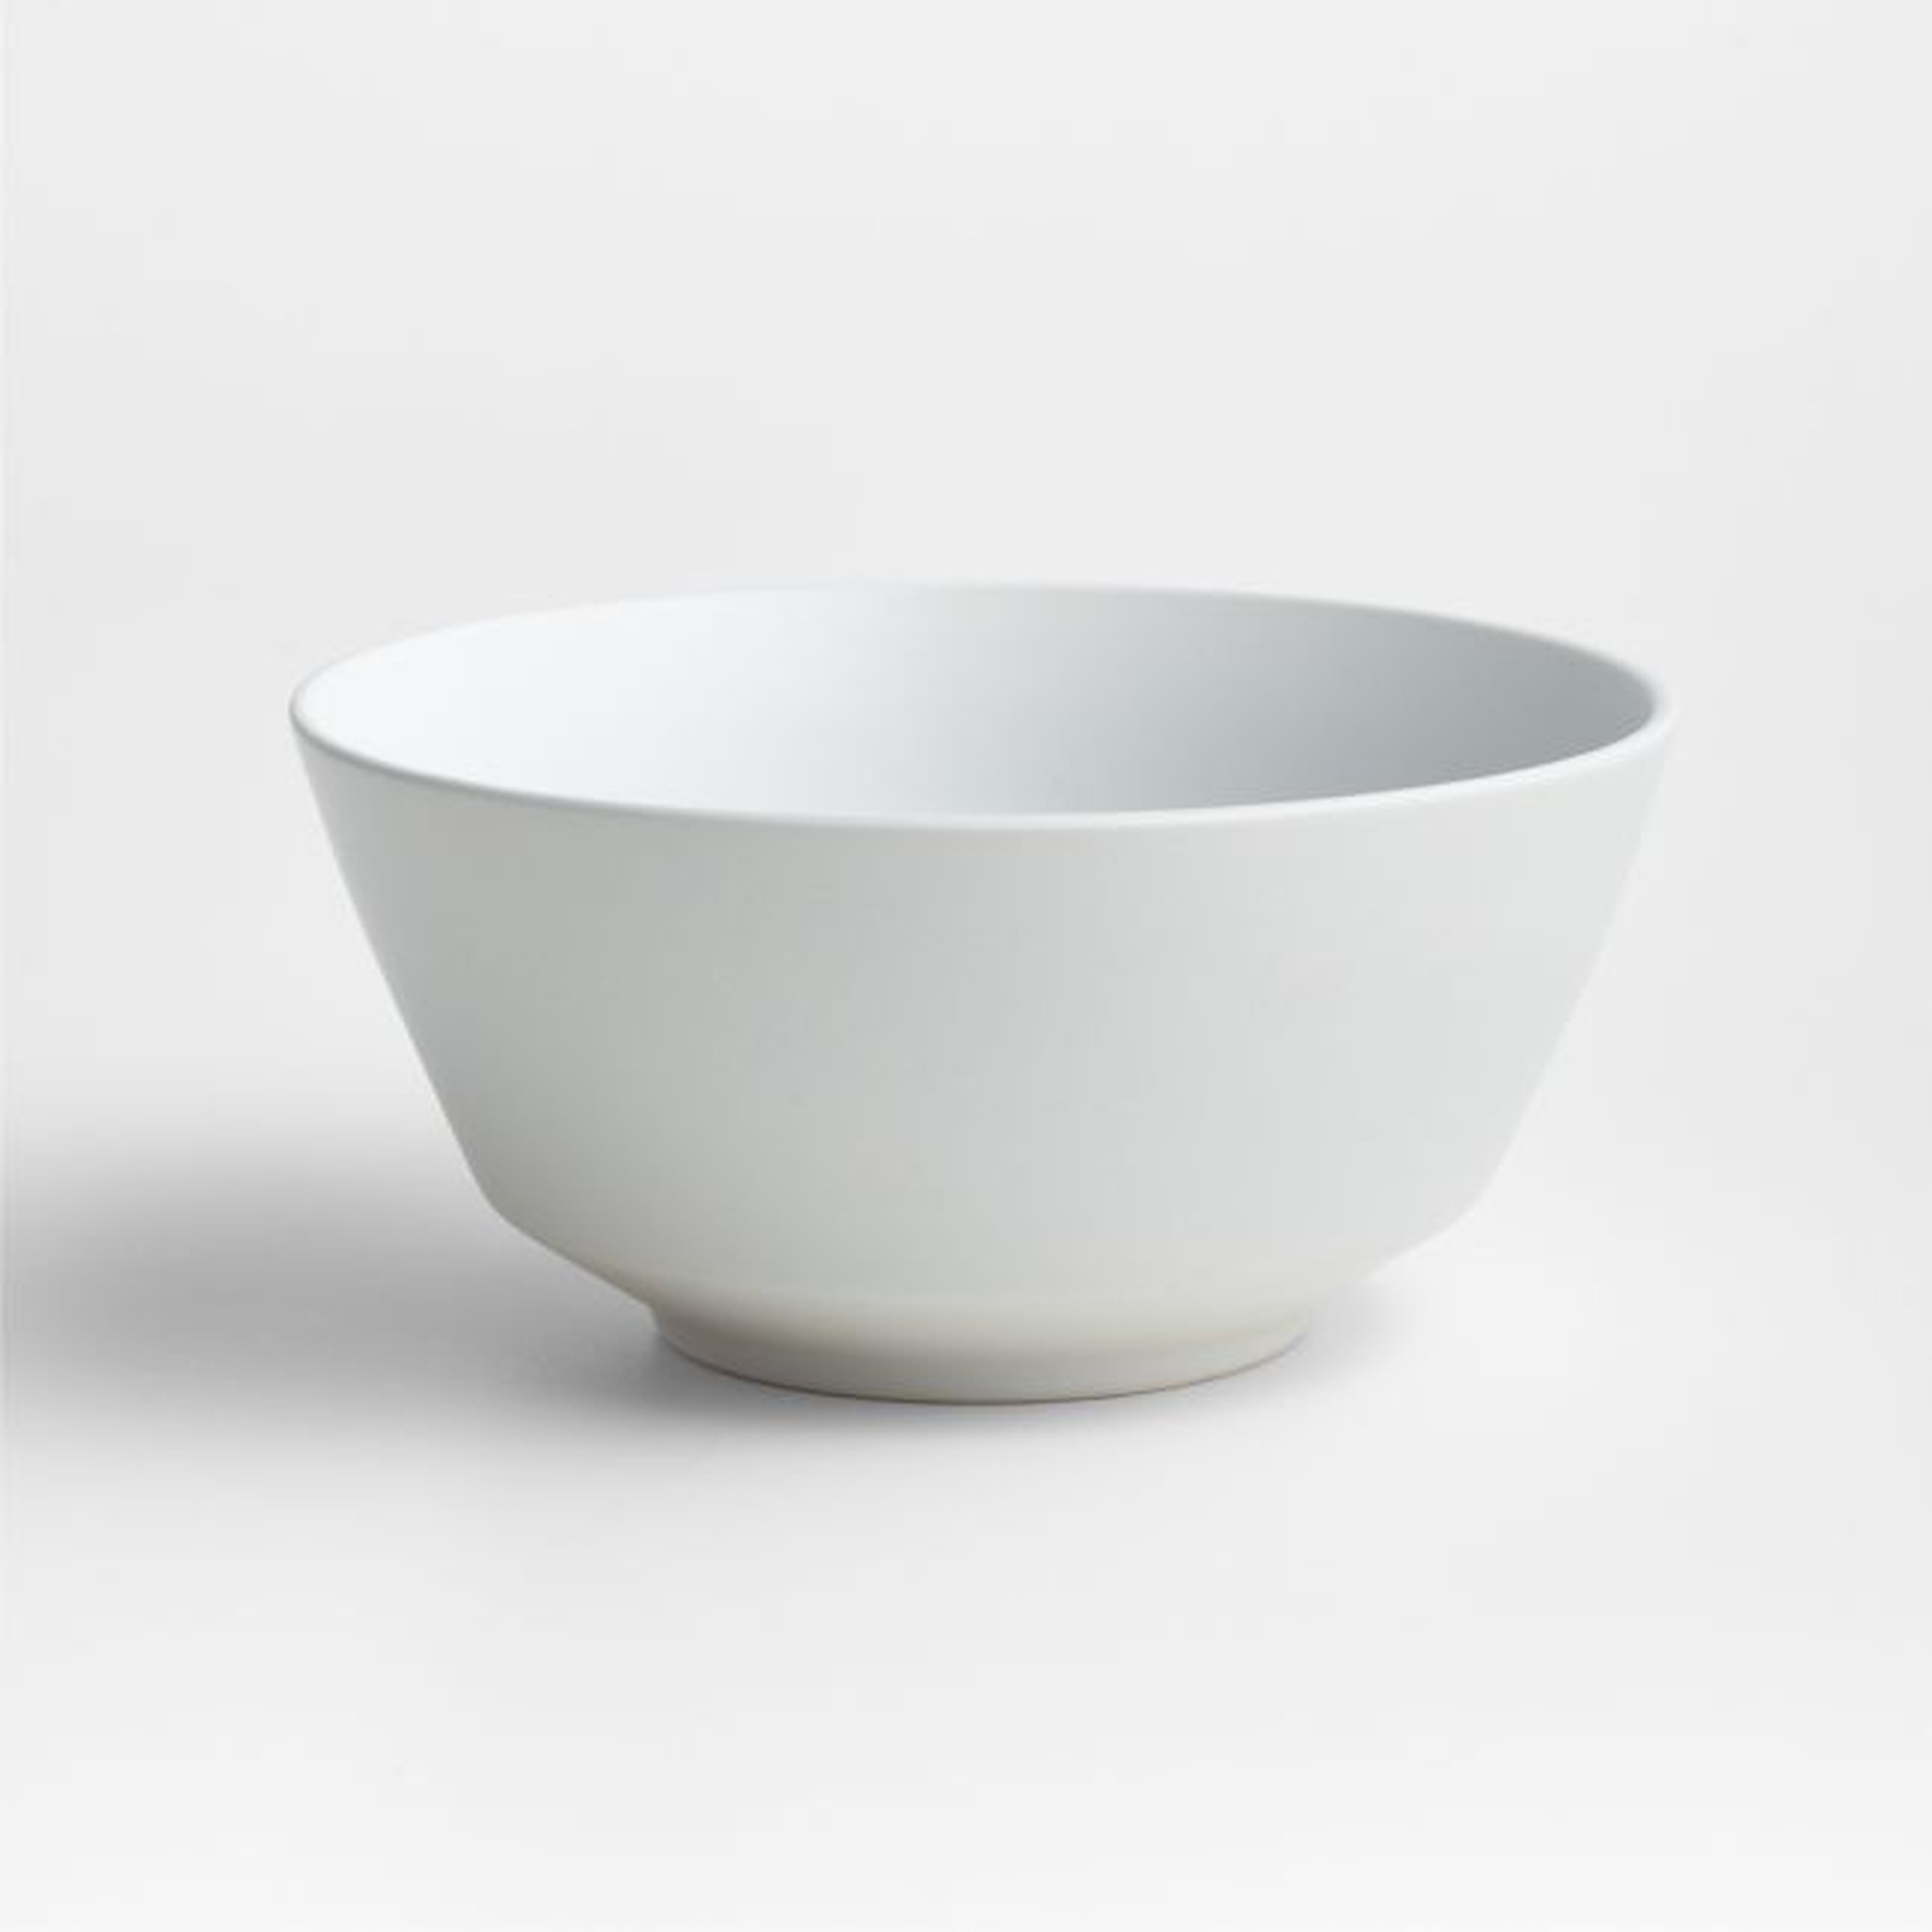 Paige White Cereal Bowl - Crate and Barrel